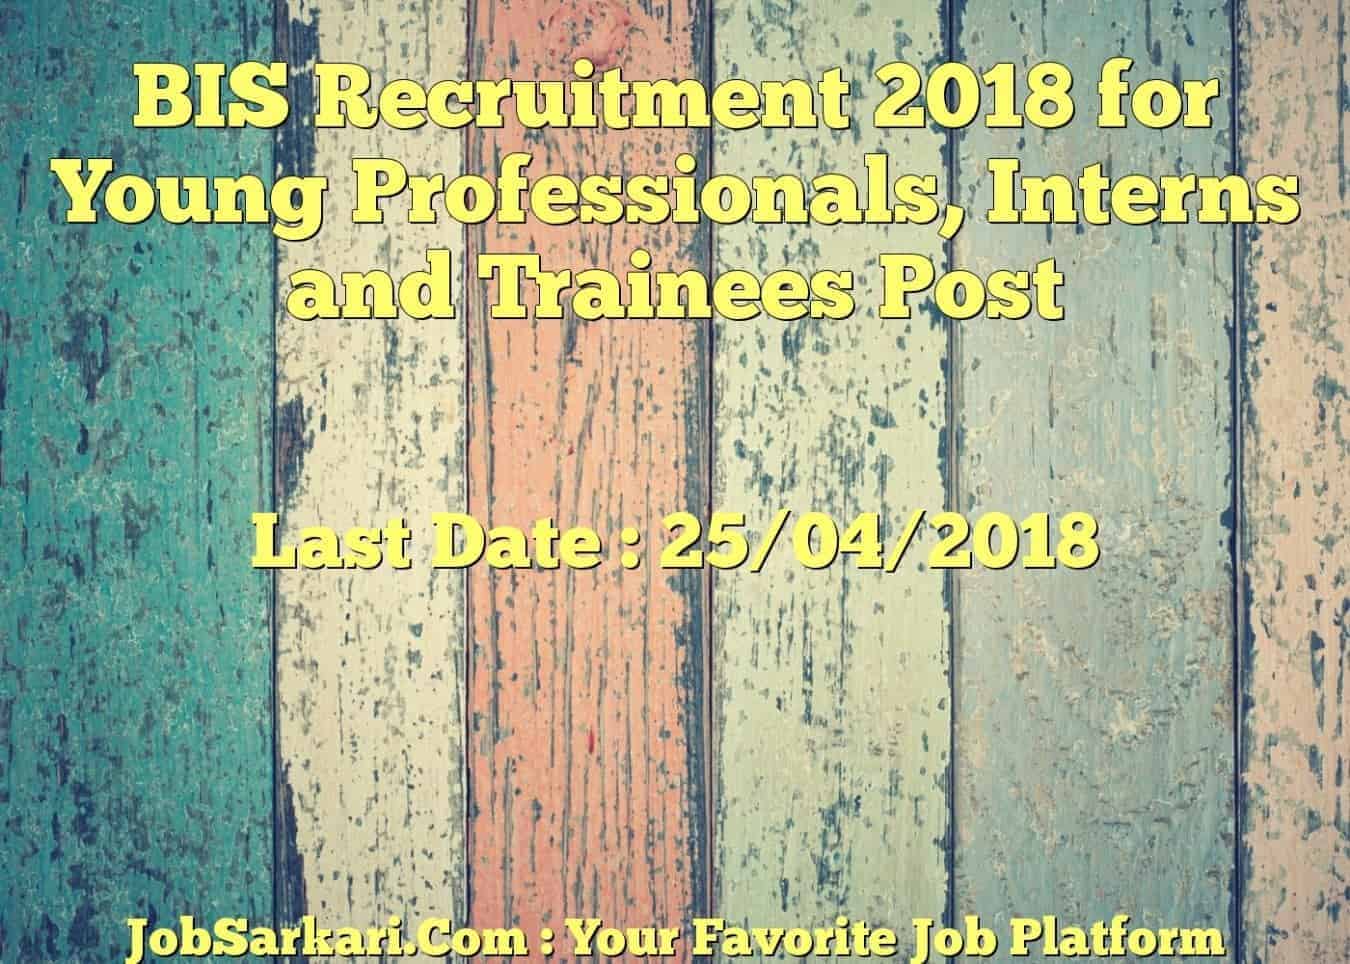 BIS Recruitment 2018 for Young Professionals, Interns and Trainees Post